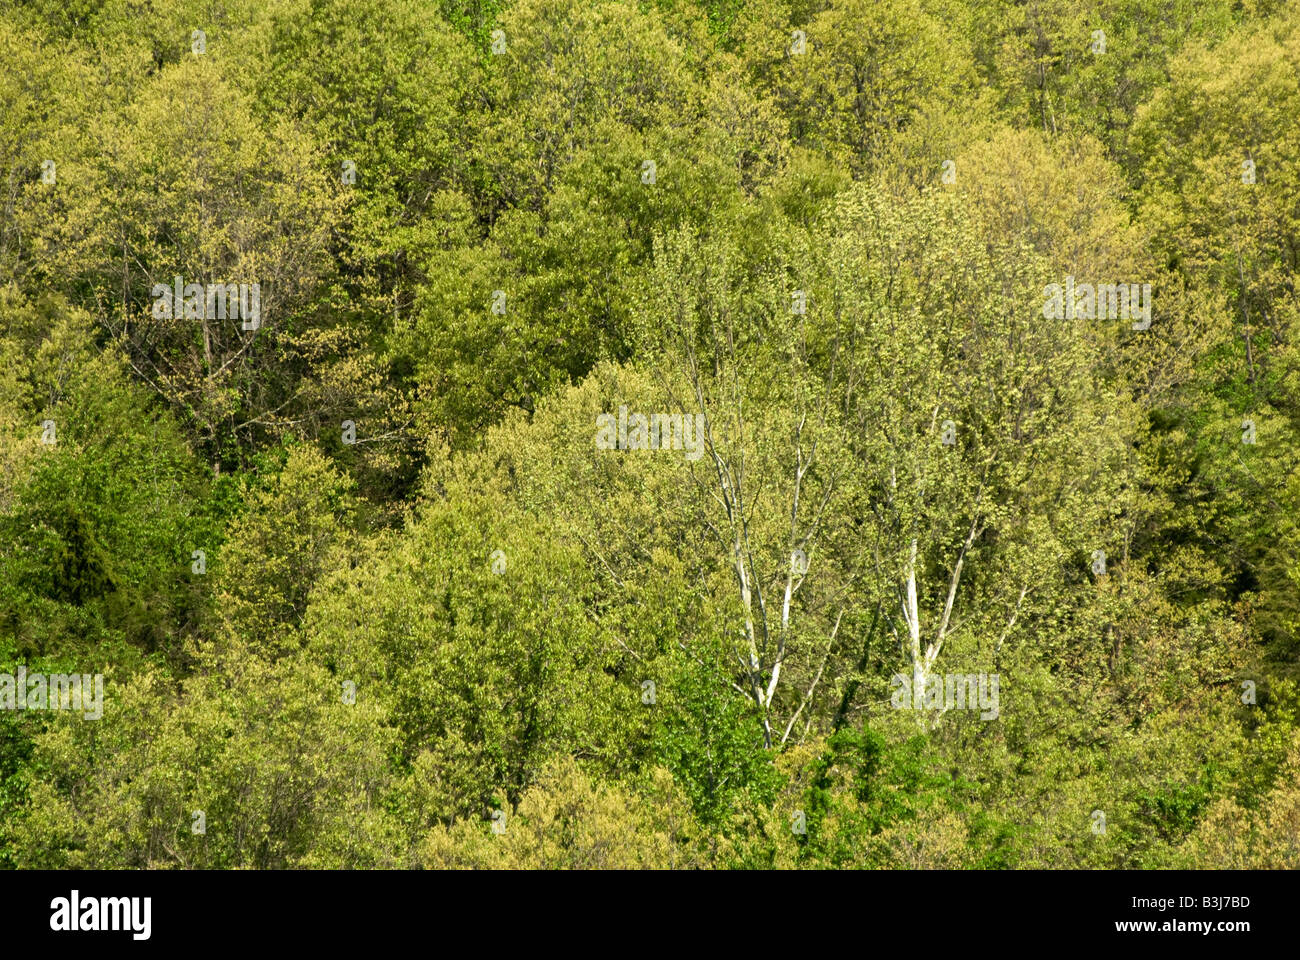 New spring foilage on deciduous trees along the Buffalo National River in the Ozark Mountains region of Arkansas Stock Photo